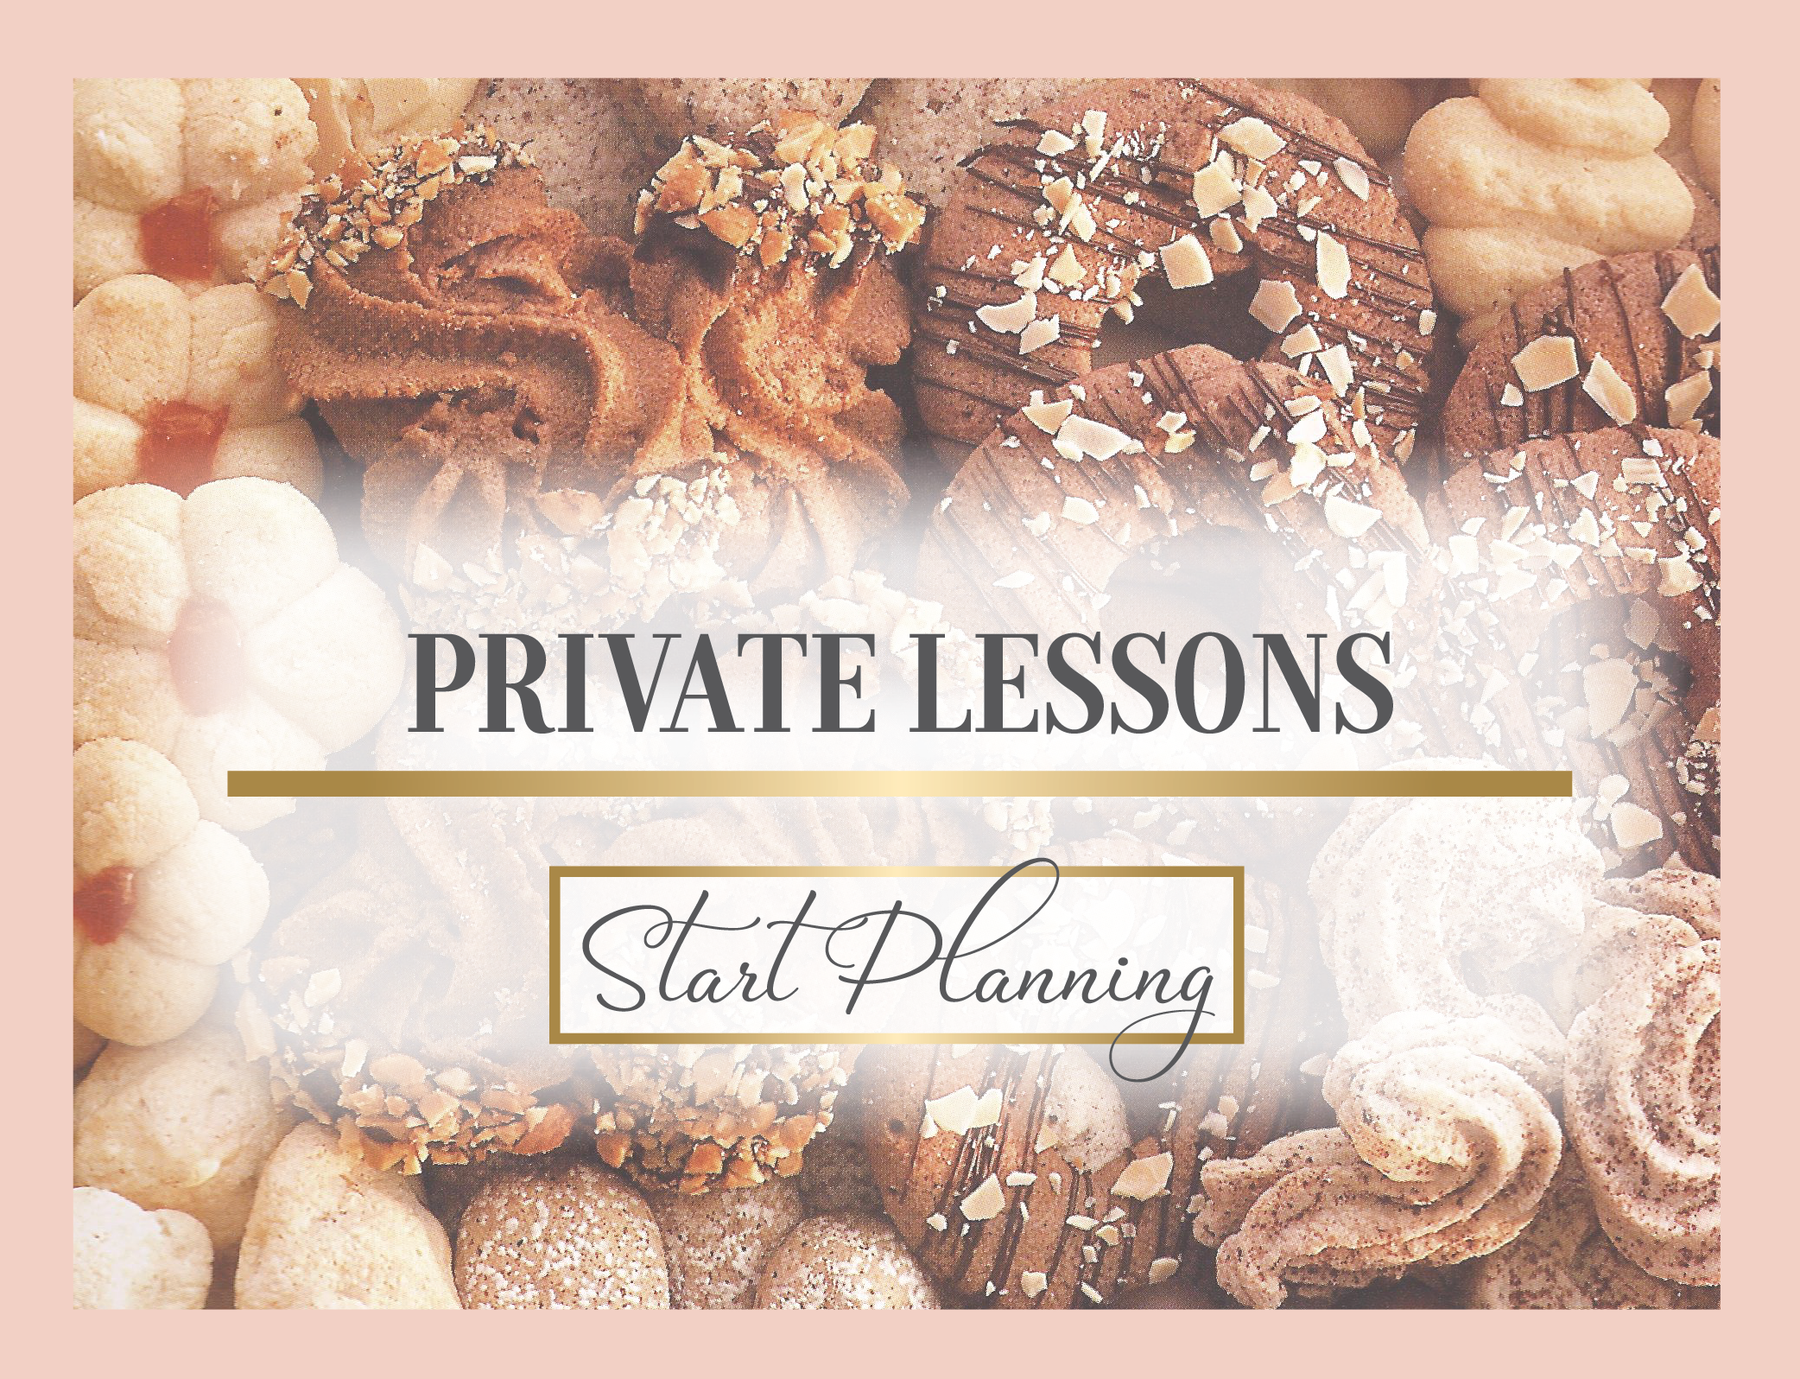 NY Cake Academy | Start Planning For Private Cake And Pastry Decorating Lessons